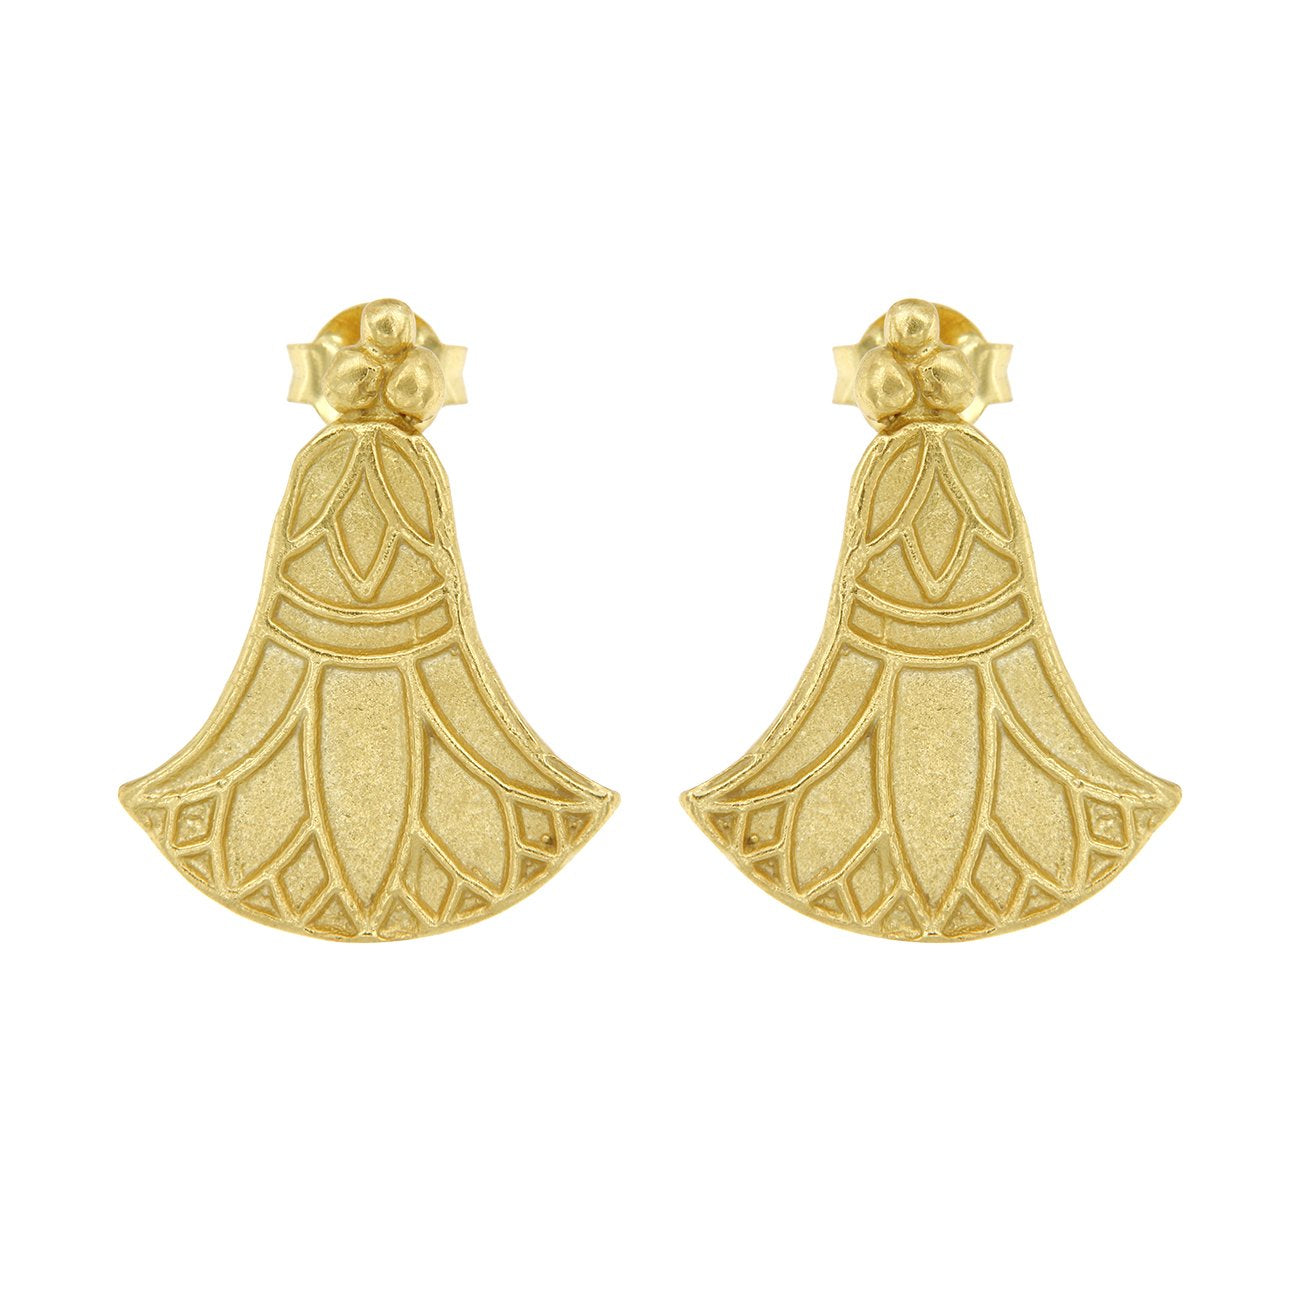 Amarna Atum Earrings - 18K Gold Plated